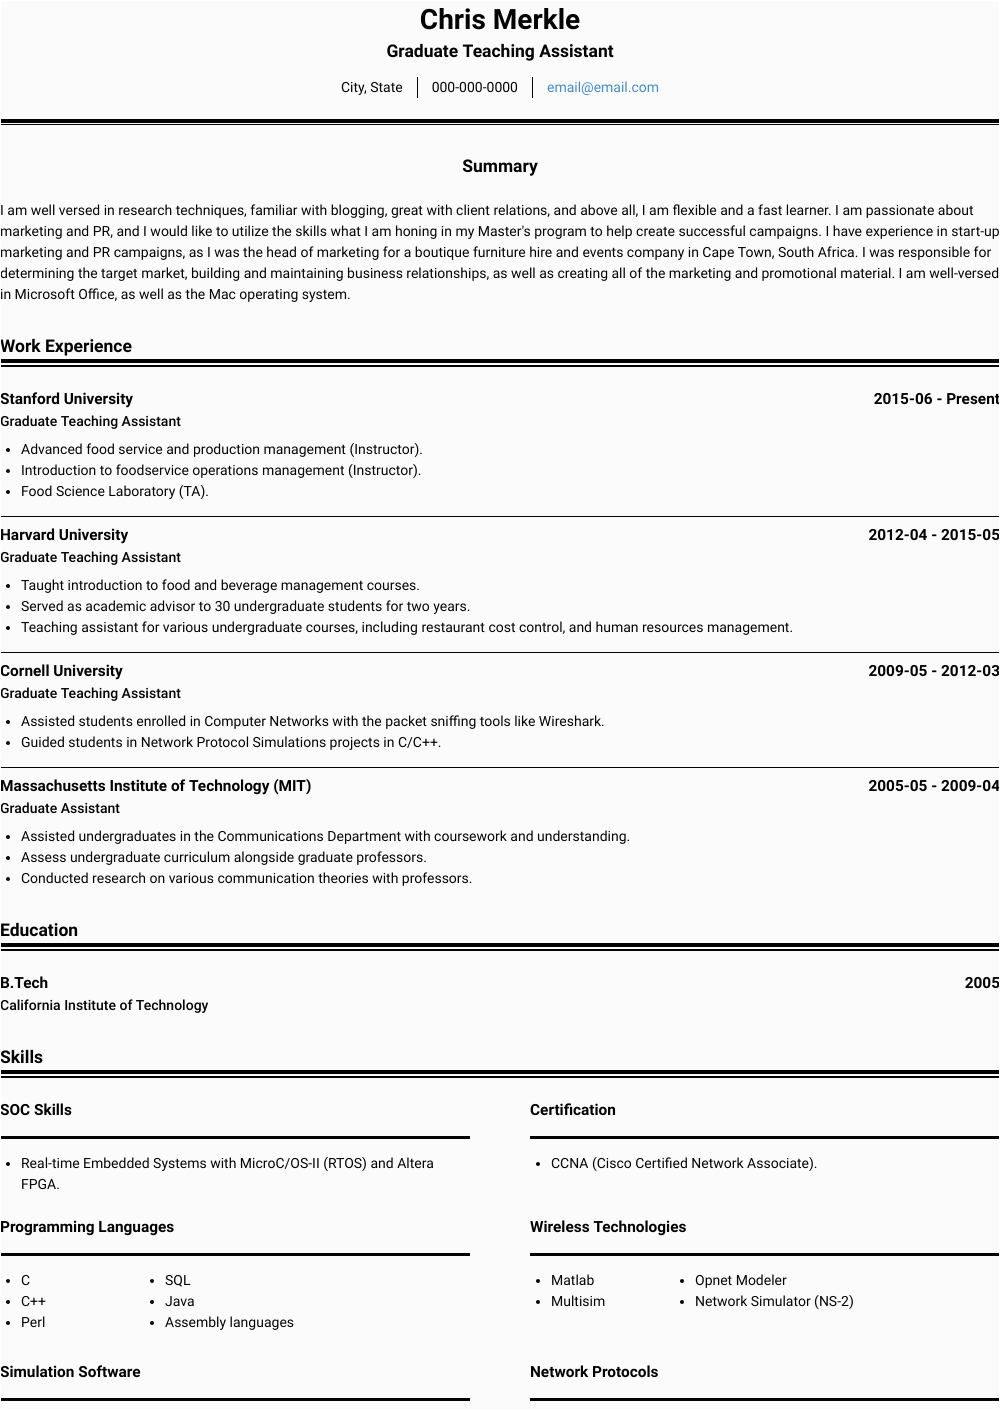 Sample Resume for Graduate assistant Position Graduate assistant Resume Samples and Templates